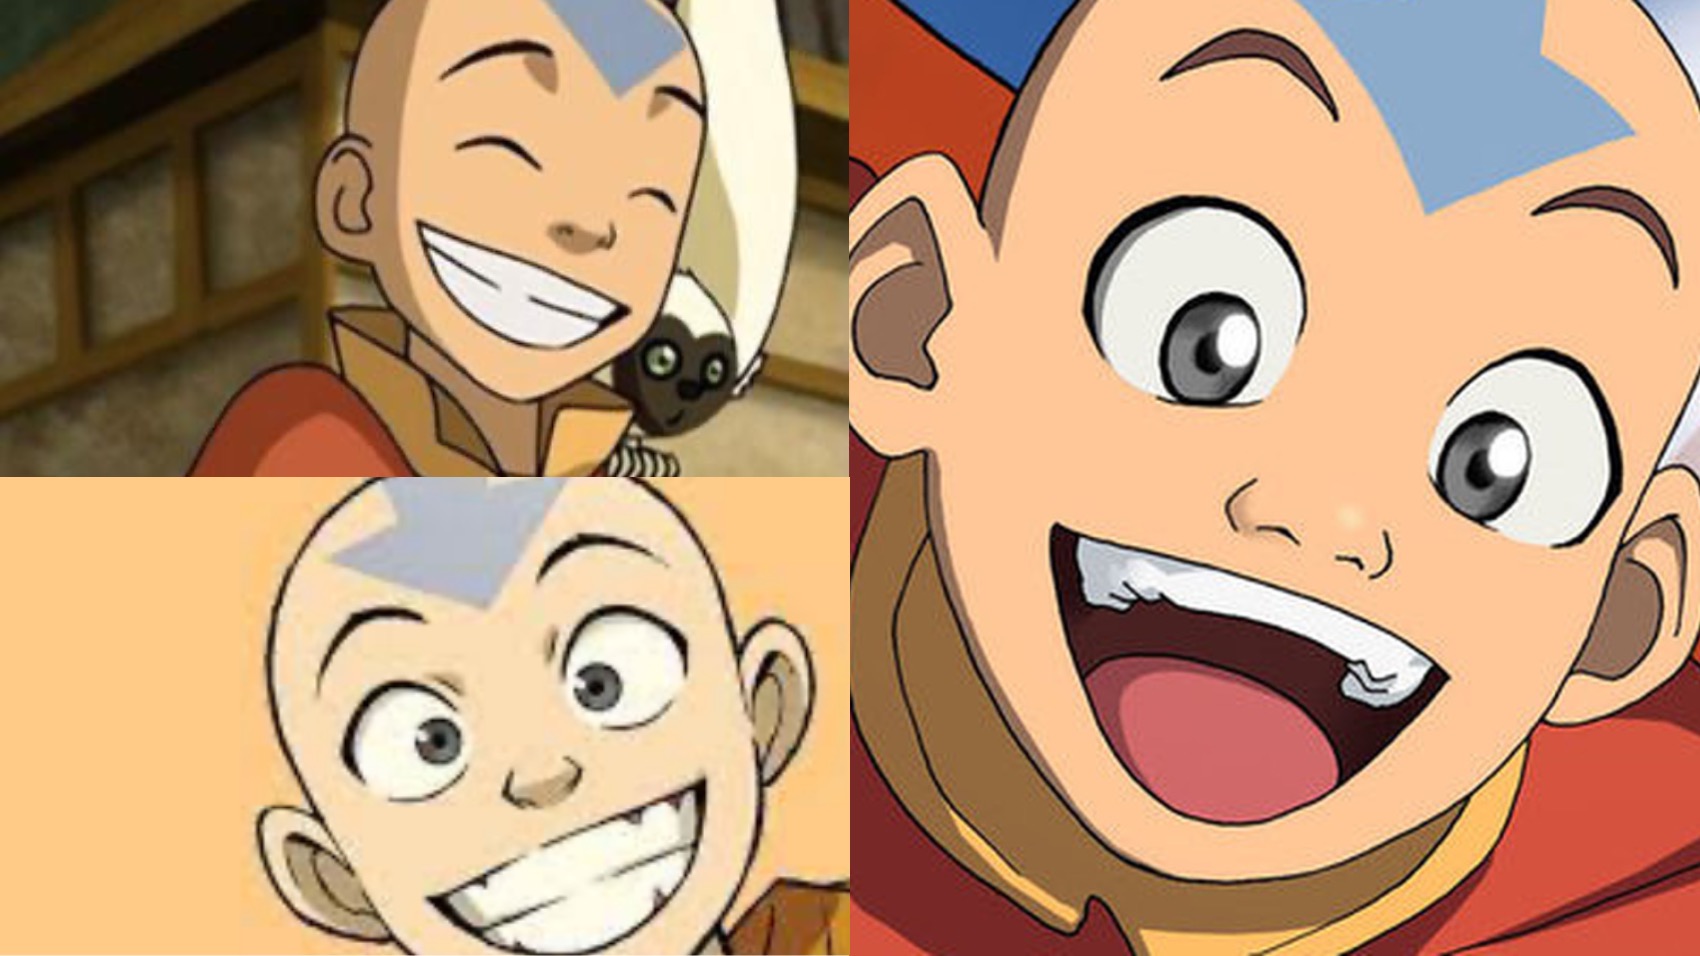 Aang from avatar the last Airbender